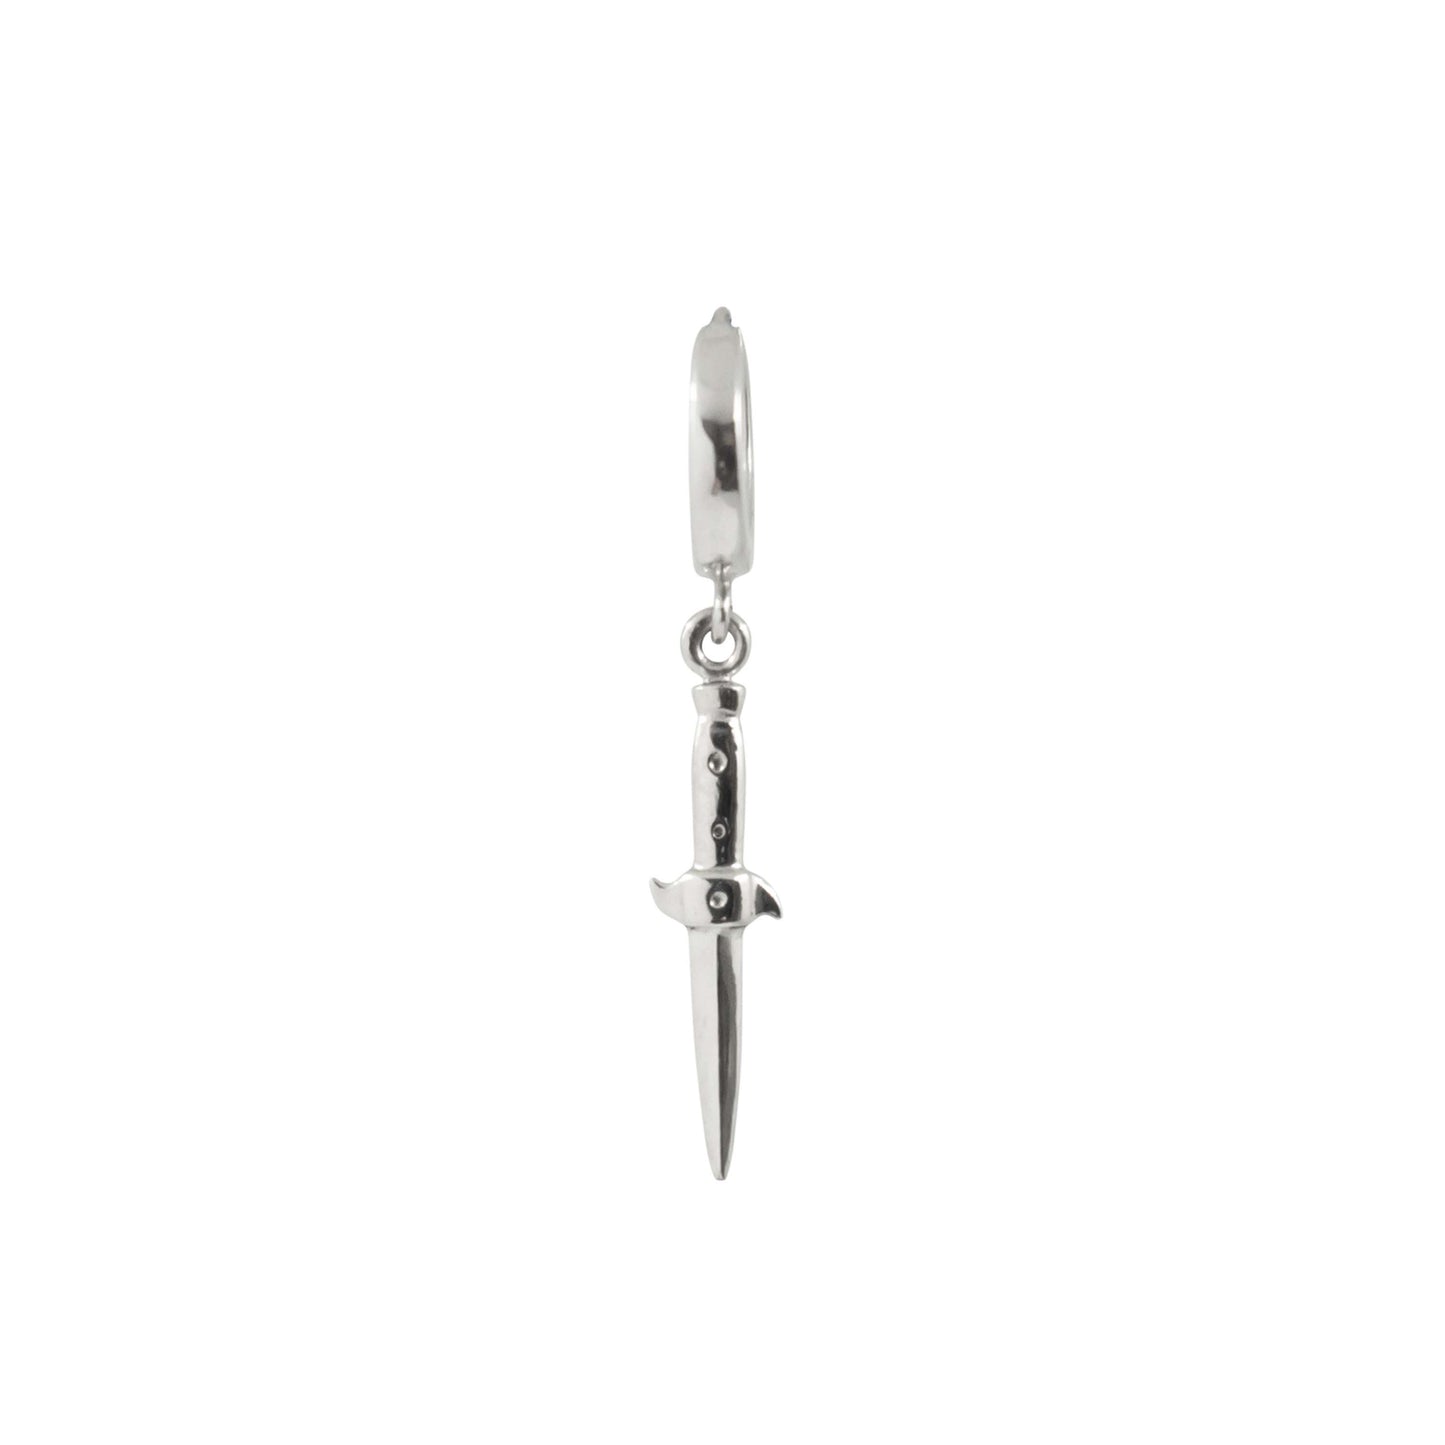 Switchblade Earring Small - Sterling Silver - Futaba Hayashi